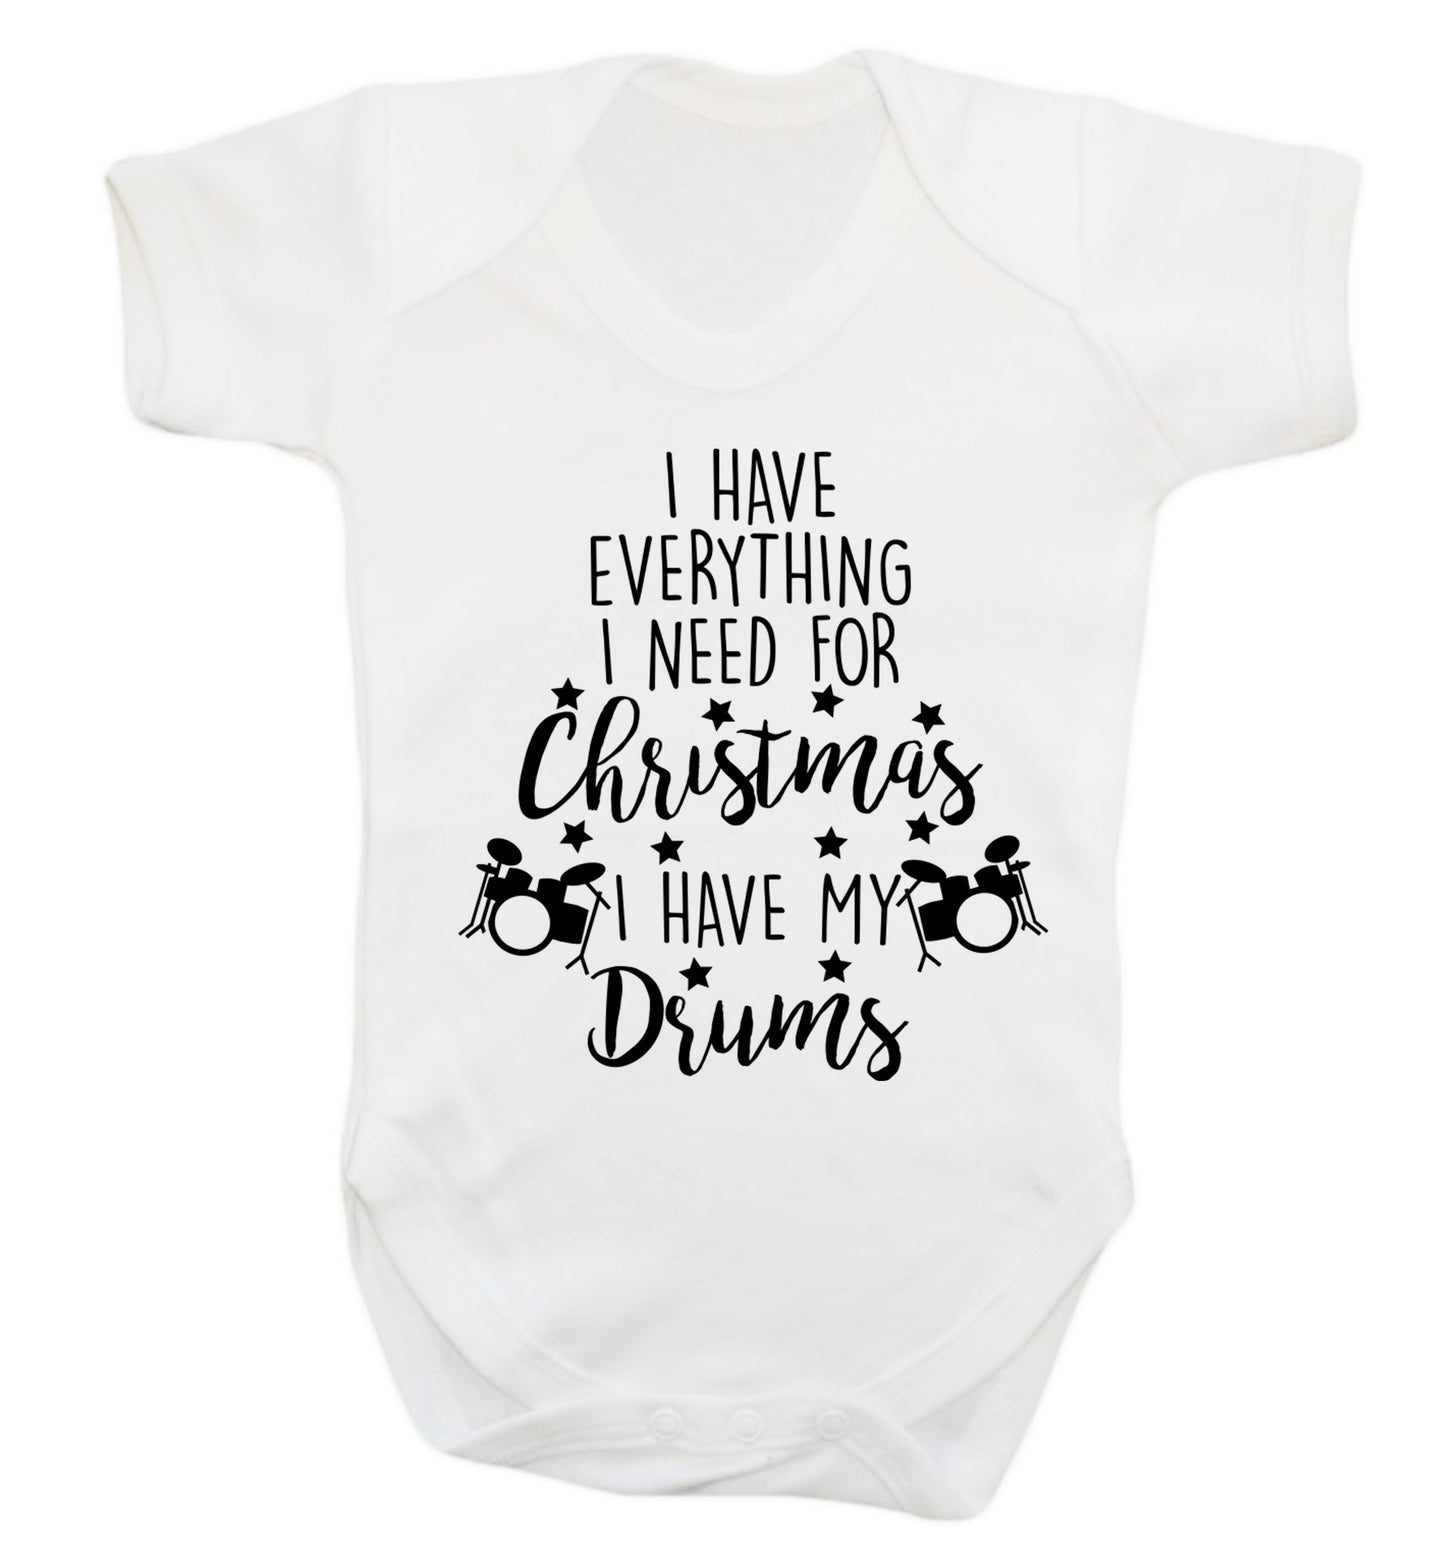 I have everything I need for Christmas I have my drums! Baby Vest white 18-24 months